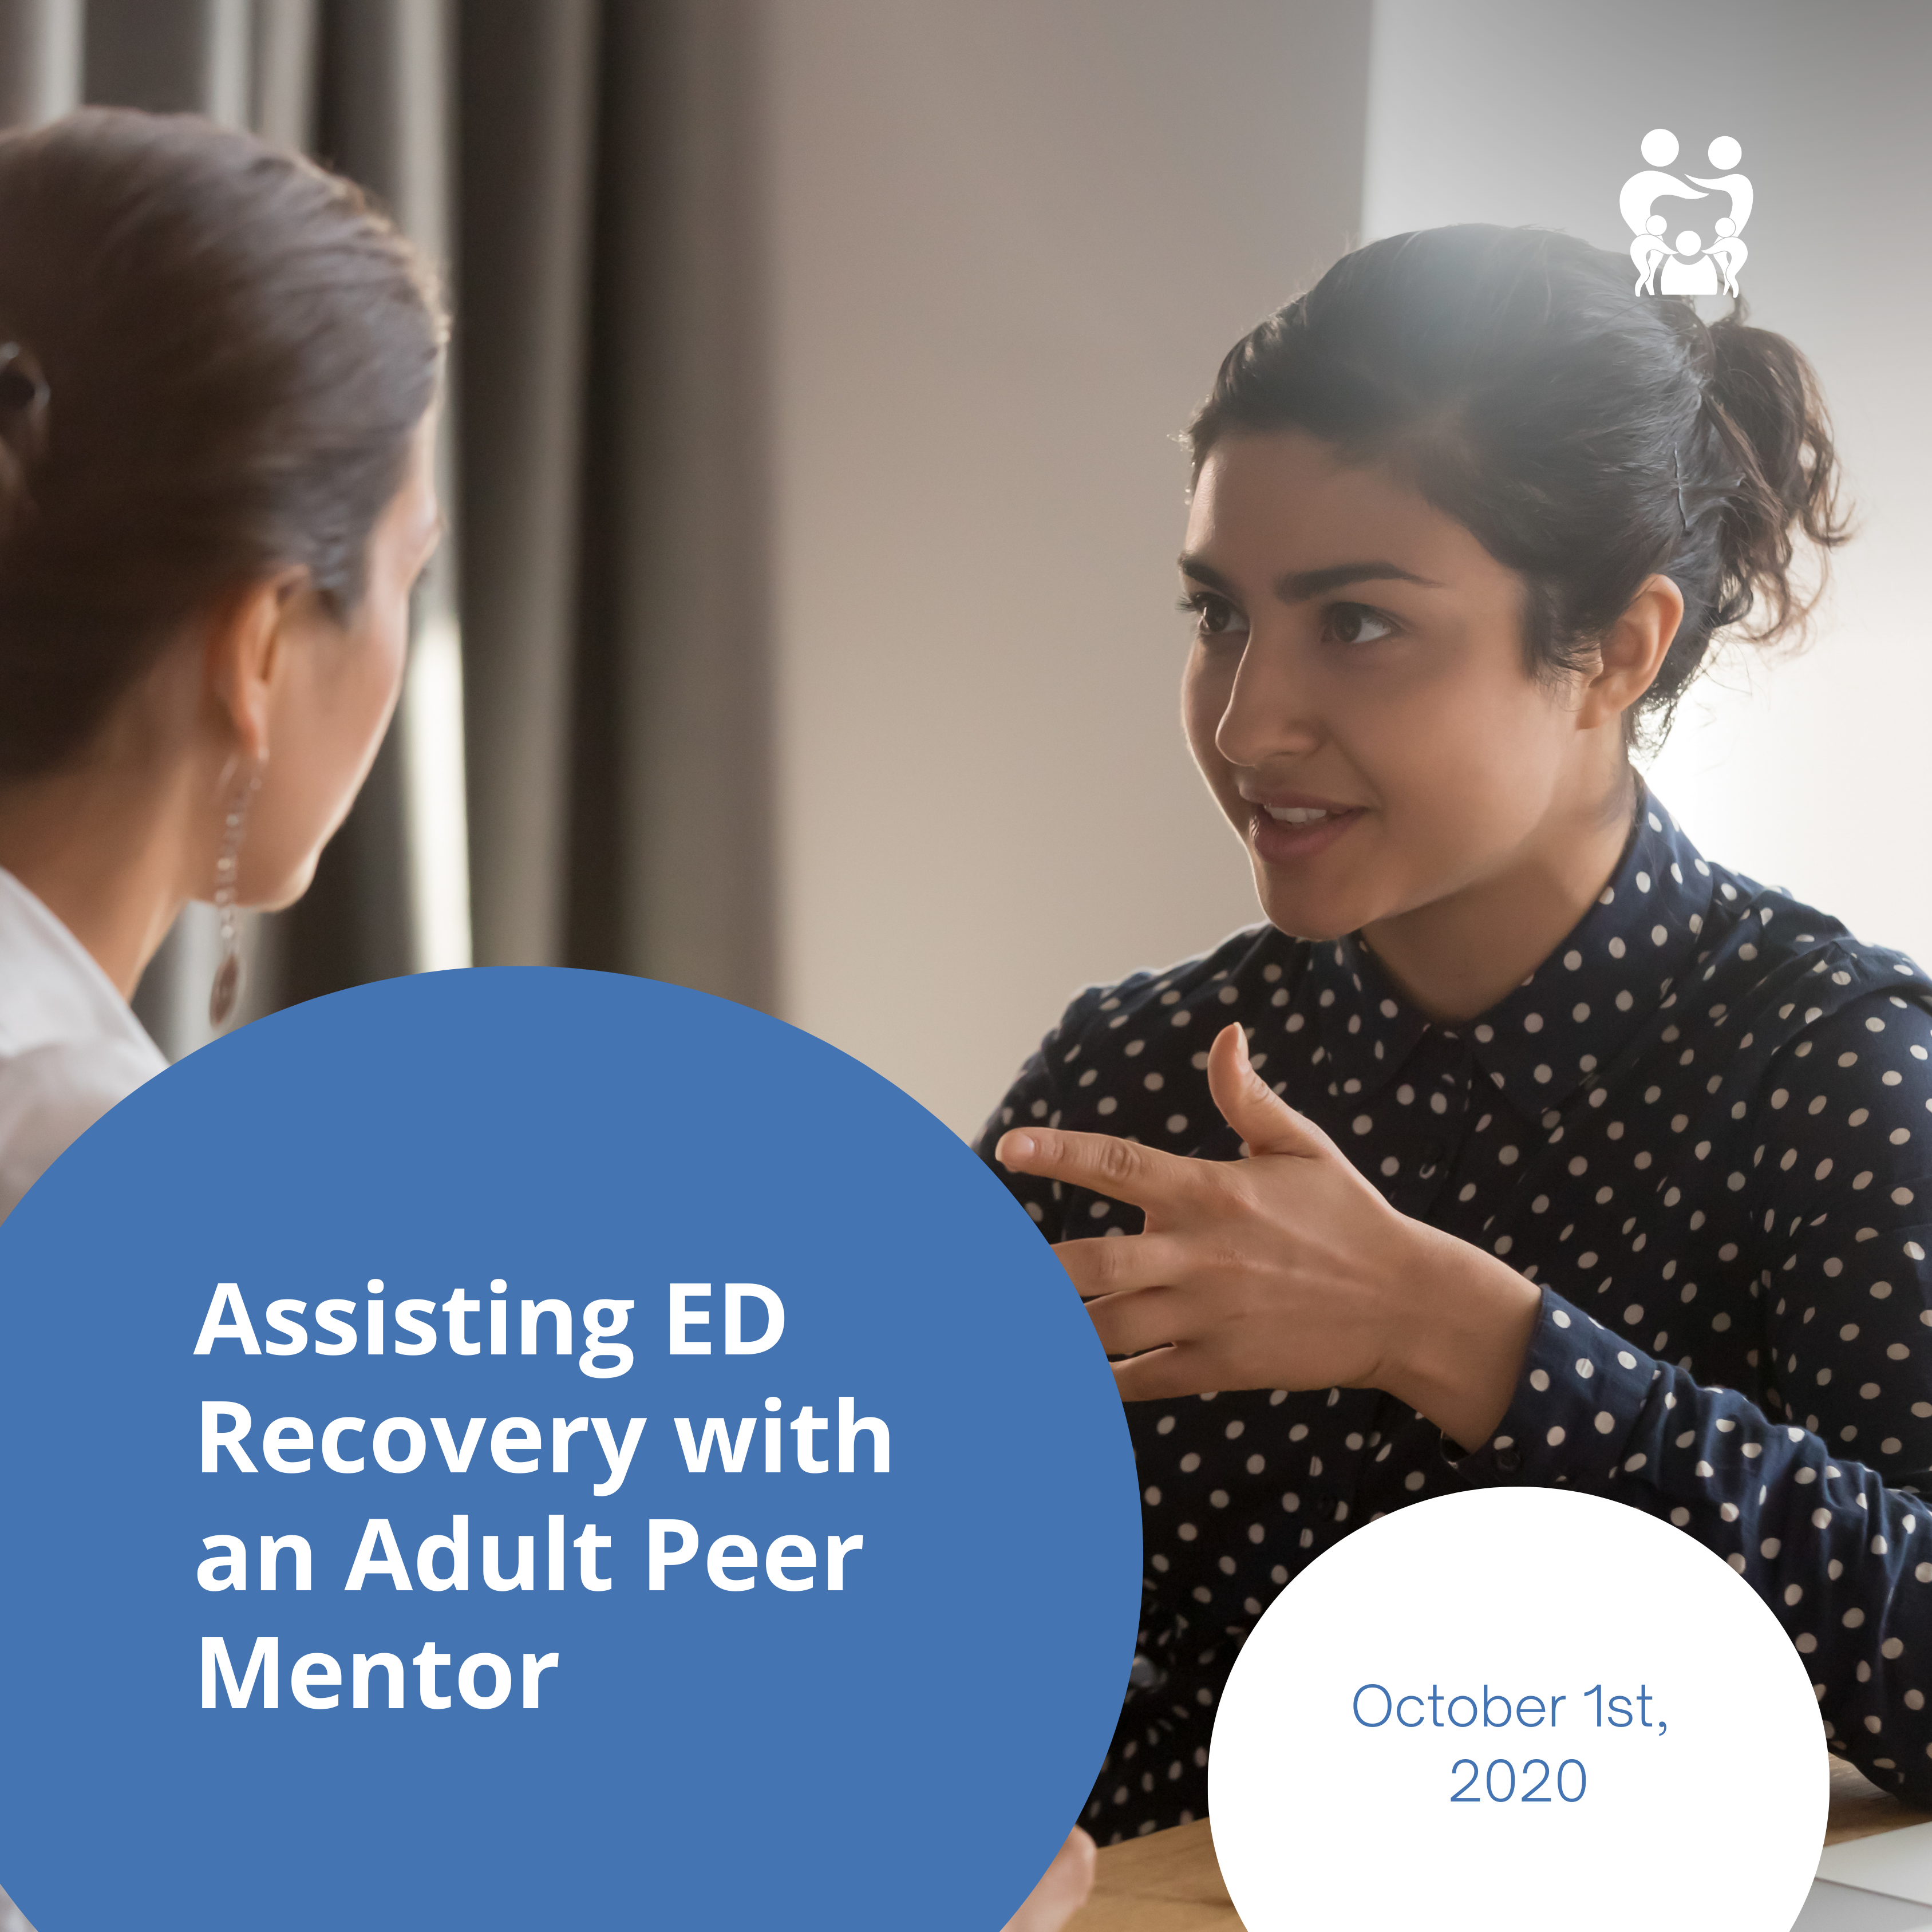 Assisting eating disorder recovery with an Adult Peer Mentor 1 October 2020